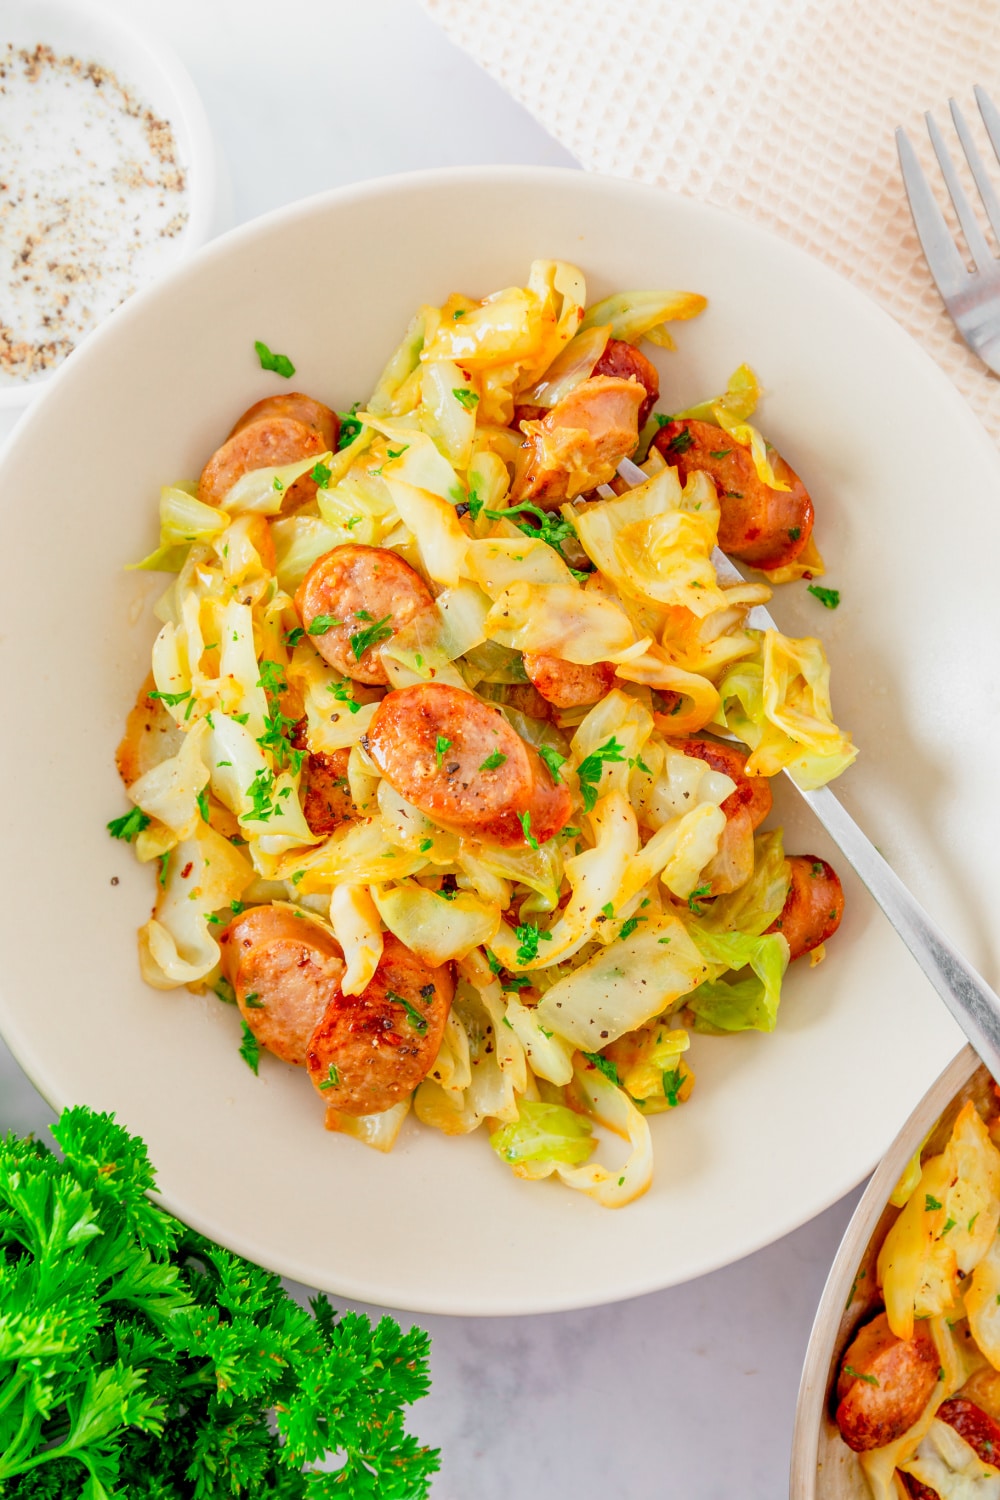 Cabbage and Sausage in a white bowl with fork.